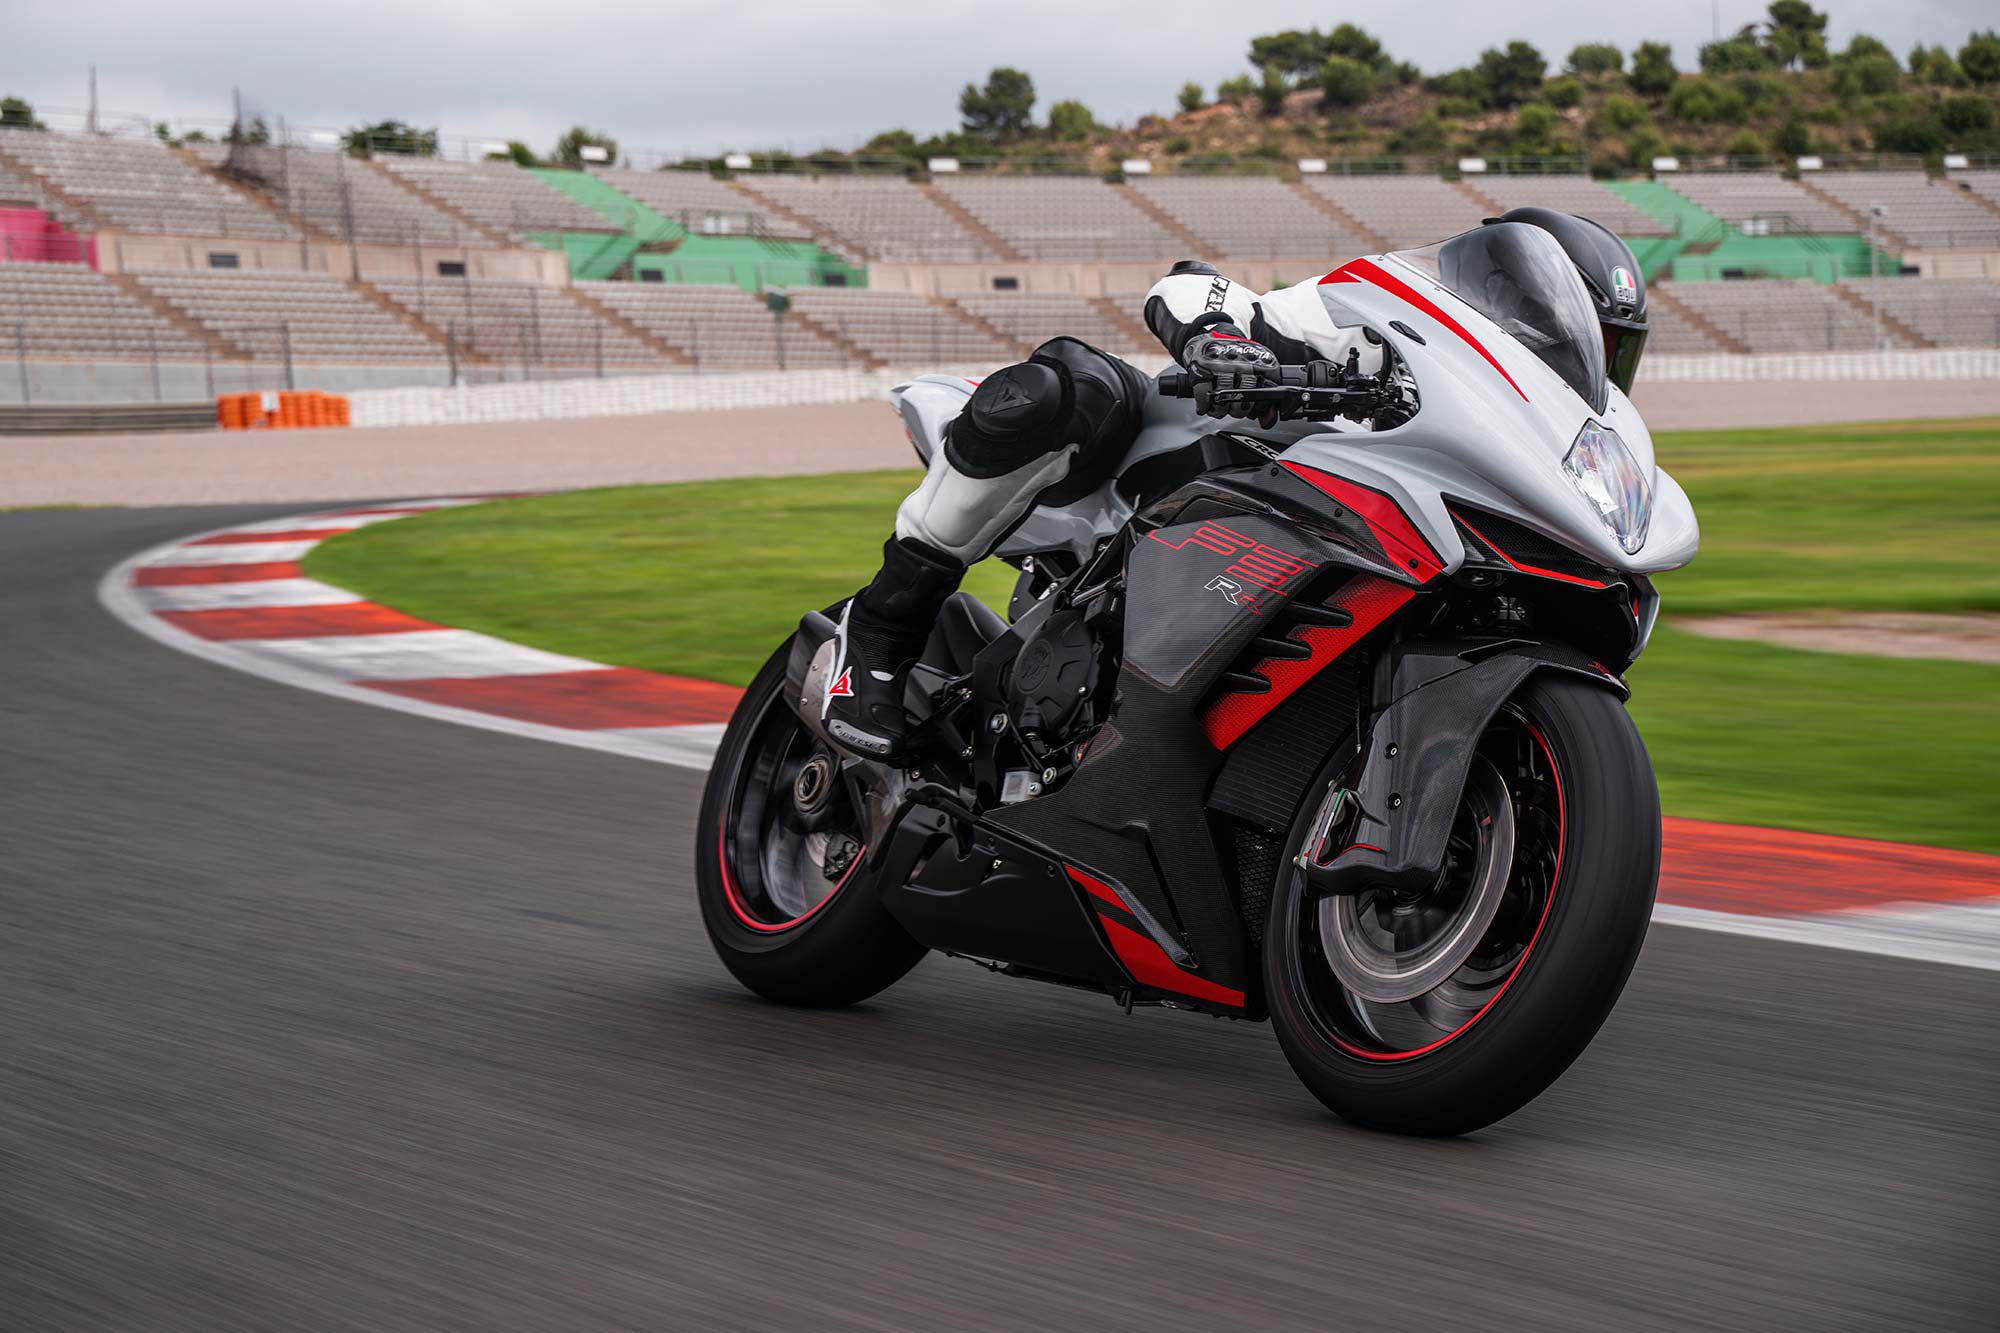 The new MV Agusta F3 RR is primed for on-track performance.